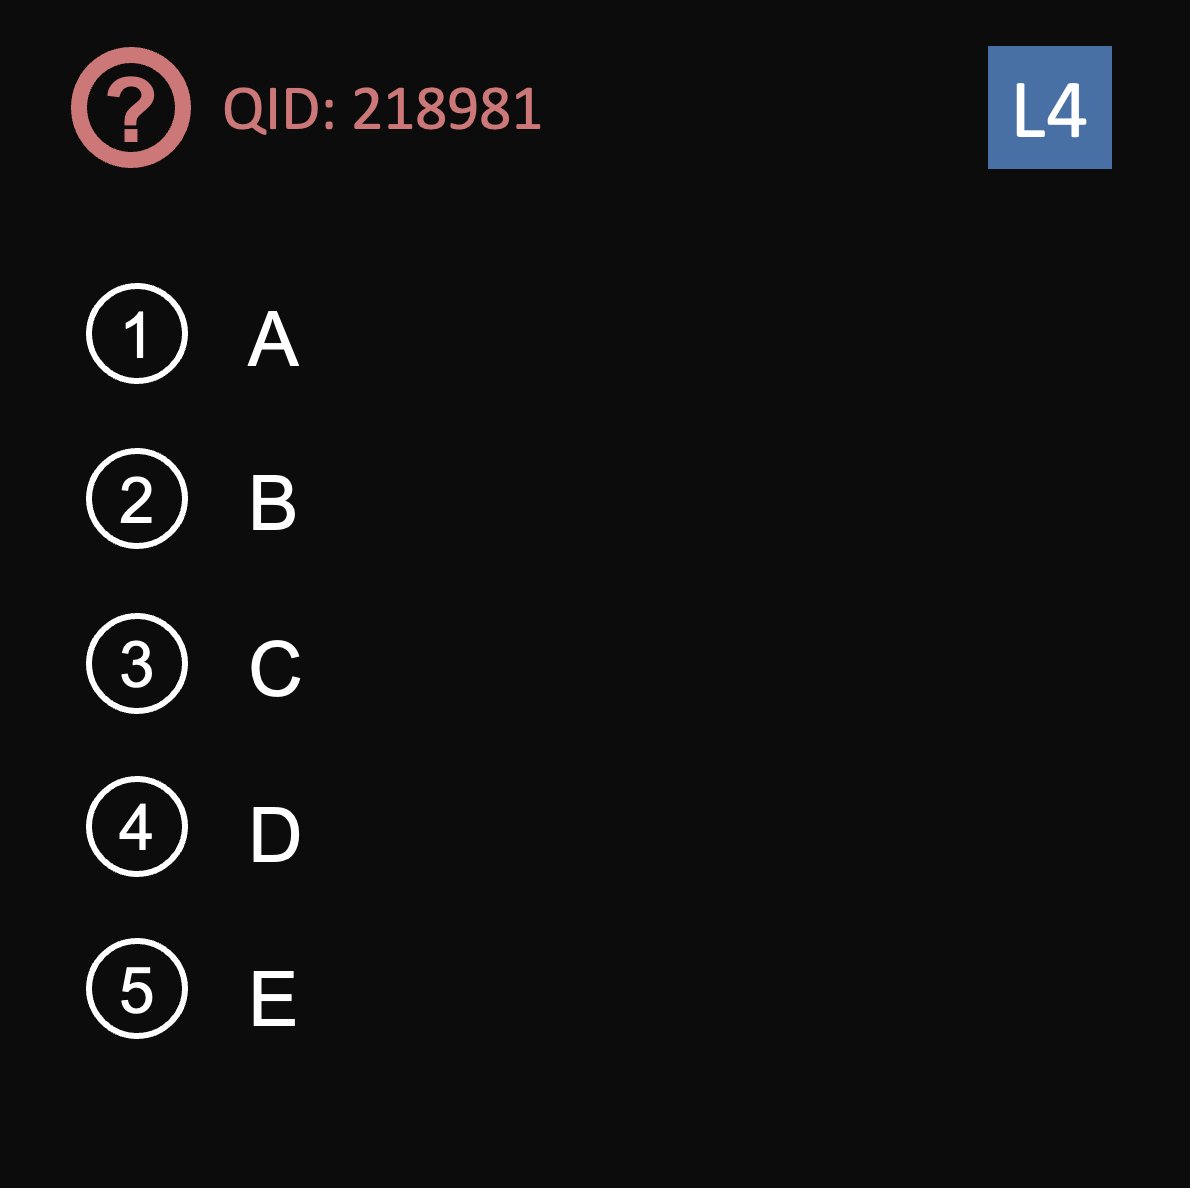 Can you answer this daily question from our Free QBank correctly? 

QID: 218981
Comment your answer below, then check to see if you got it correct by clicking the link below to see the answer & explanation.
bit.ly/4bw8UgO 
#orthotwitter #MedTwitter